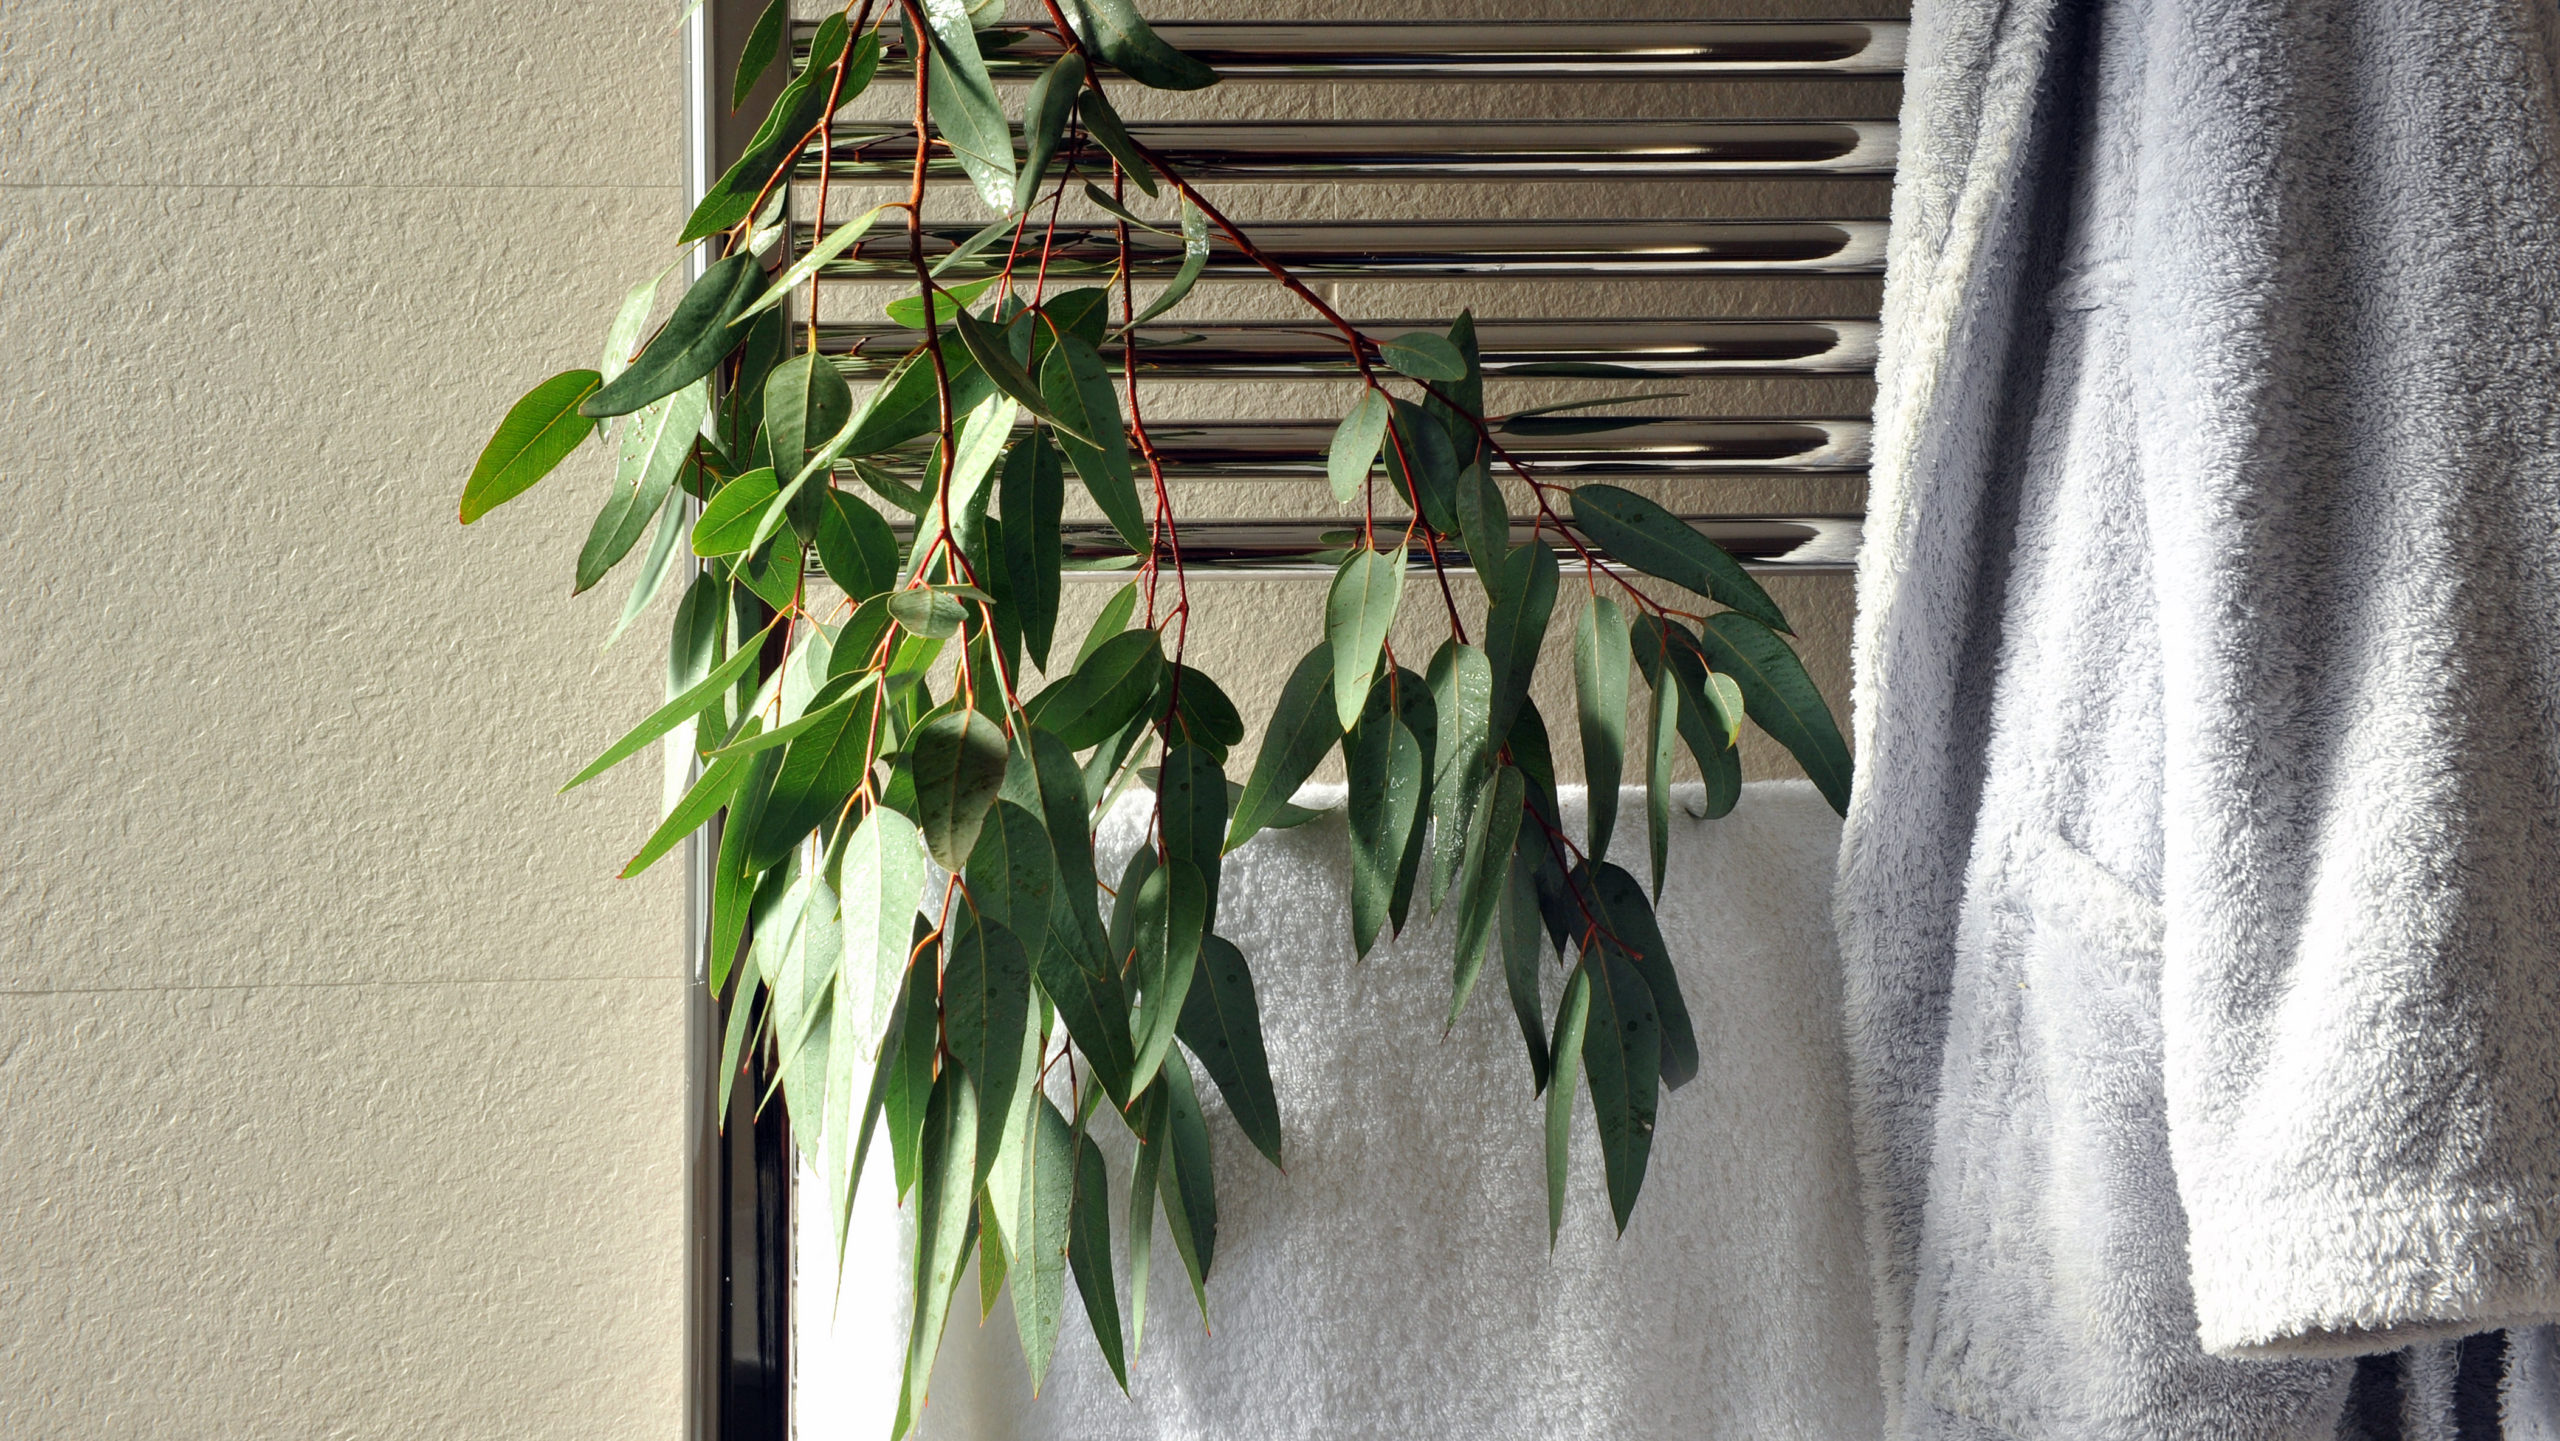 Enhance Your Shower Experience With Eucalyptus